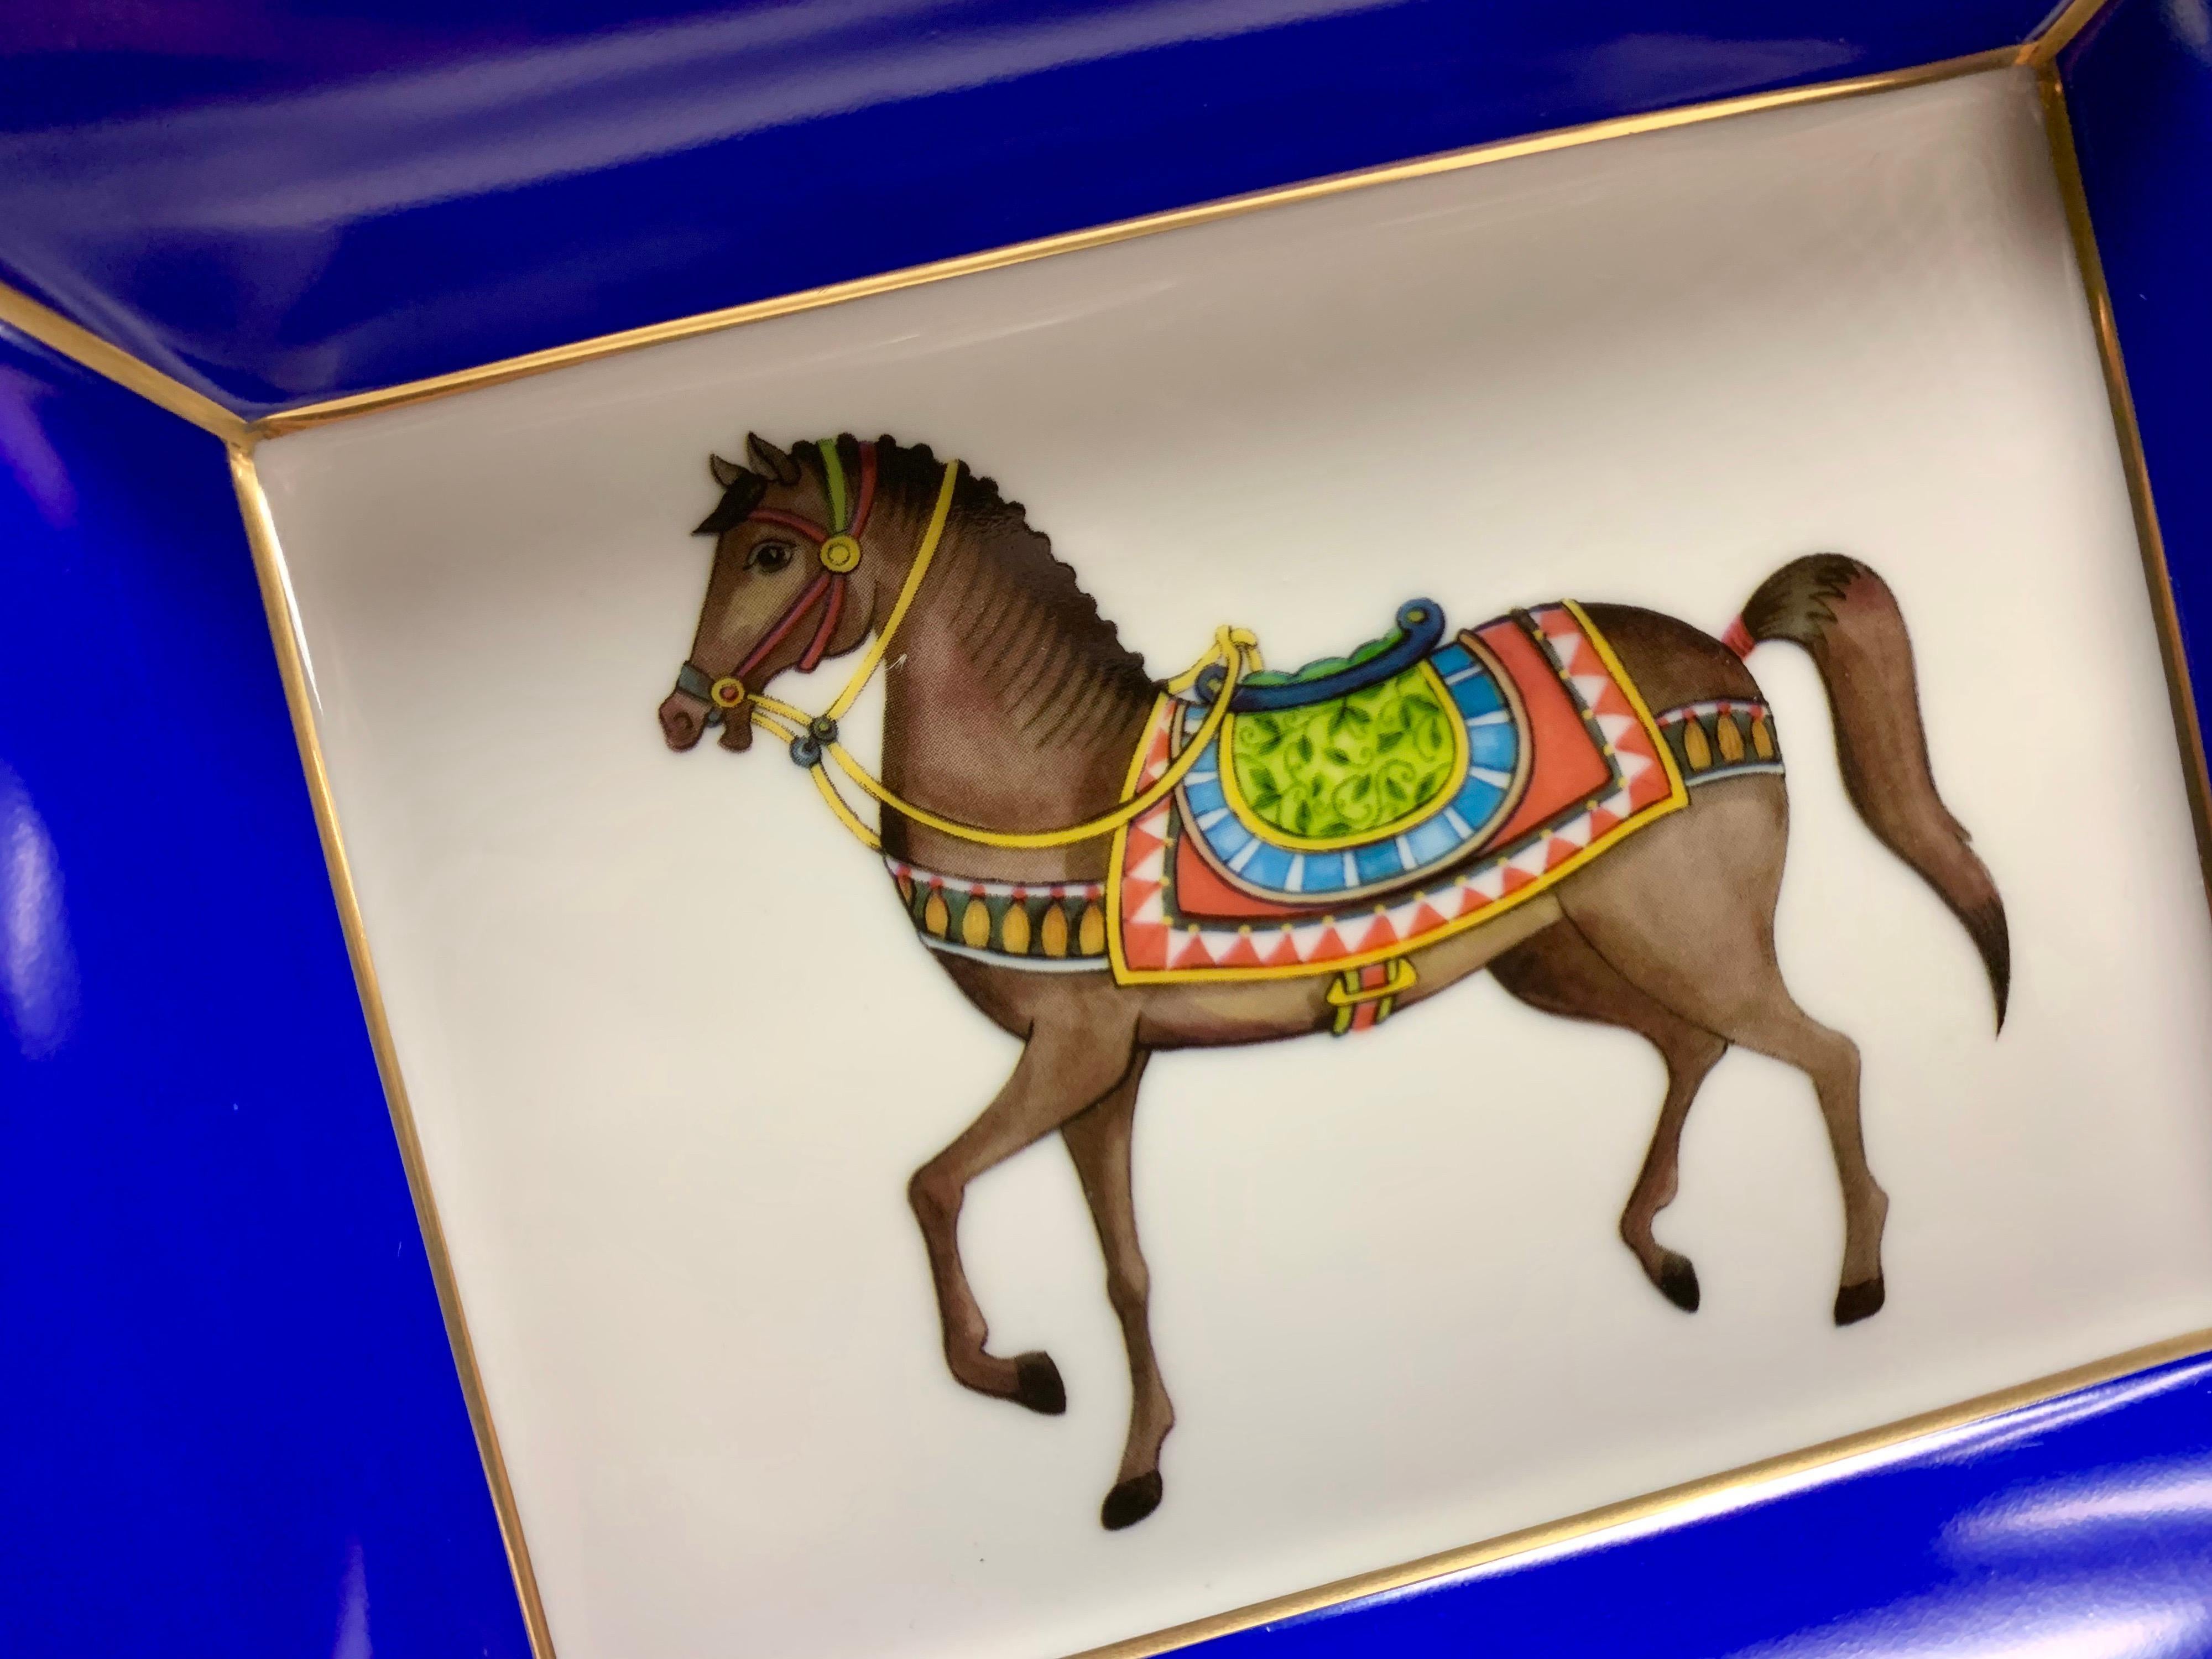 Hand-Painted Italian Craftsmanship Hand Painted Porcelain Tray Blue and Gold Colors